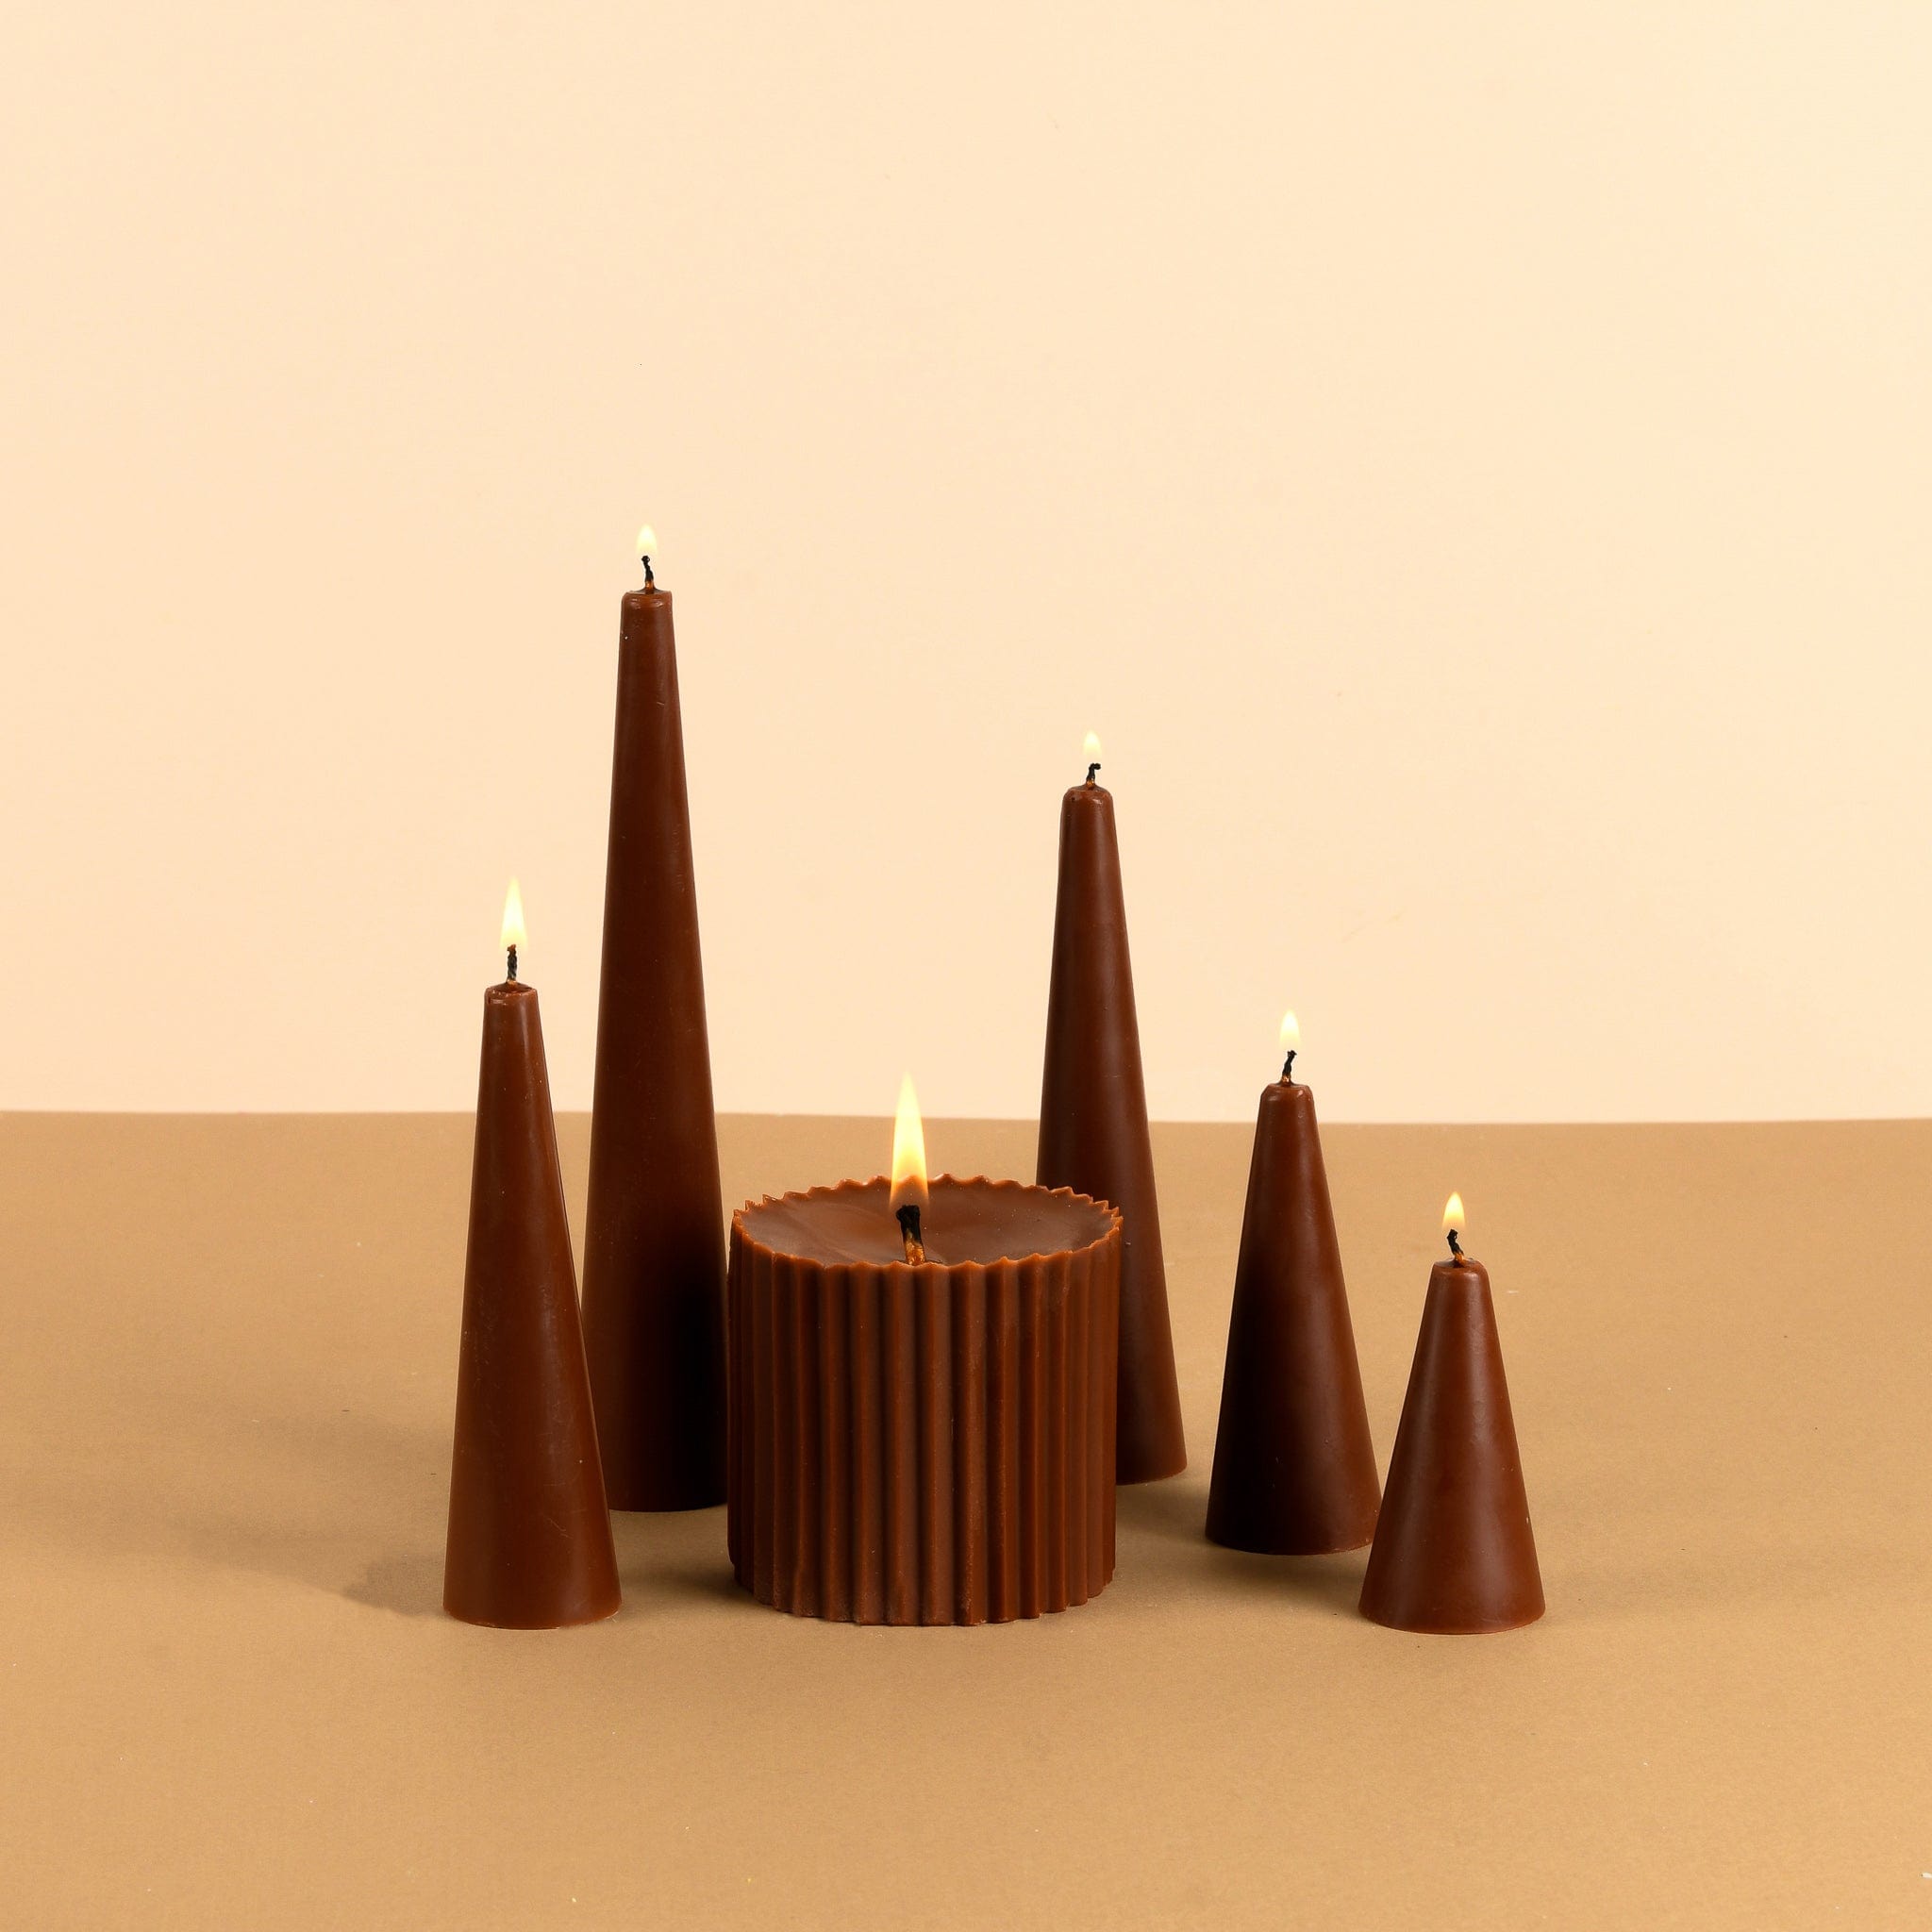 Infinity Set of 6 Chocolate Brown Candles - Tarte au Chocolat Scented